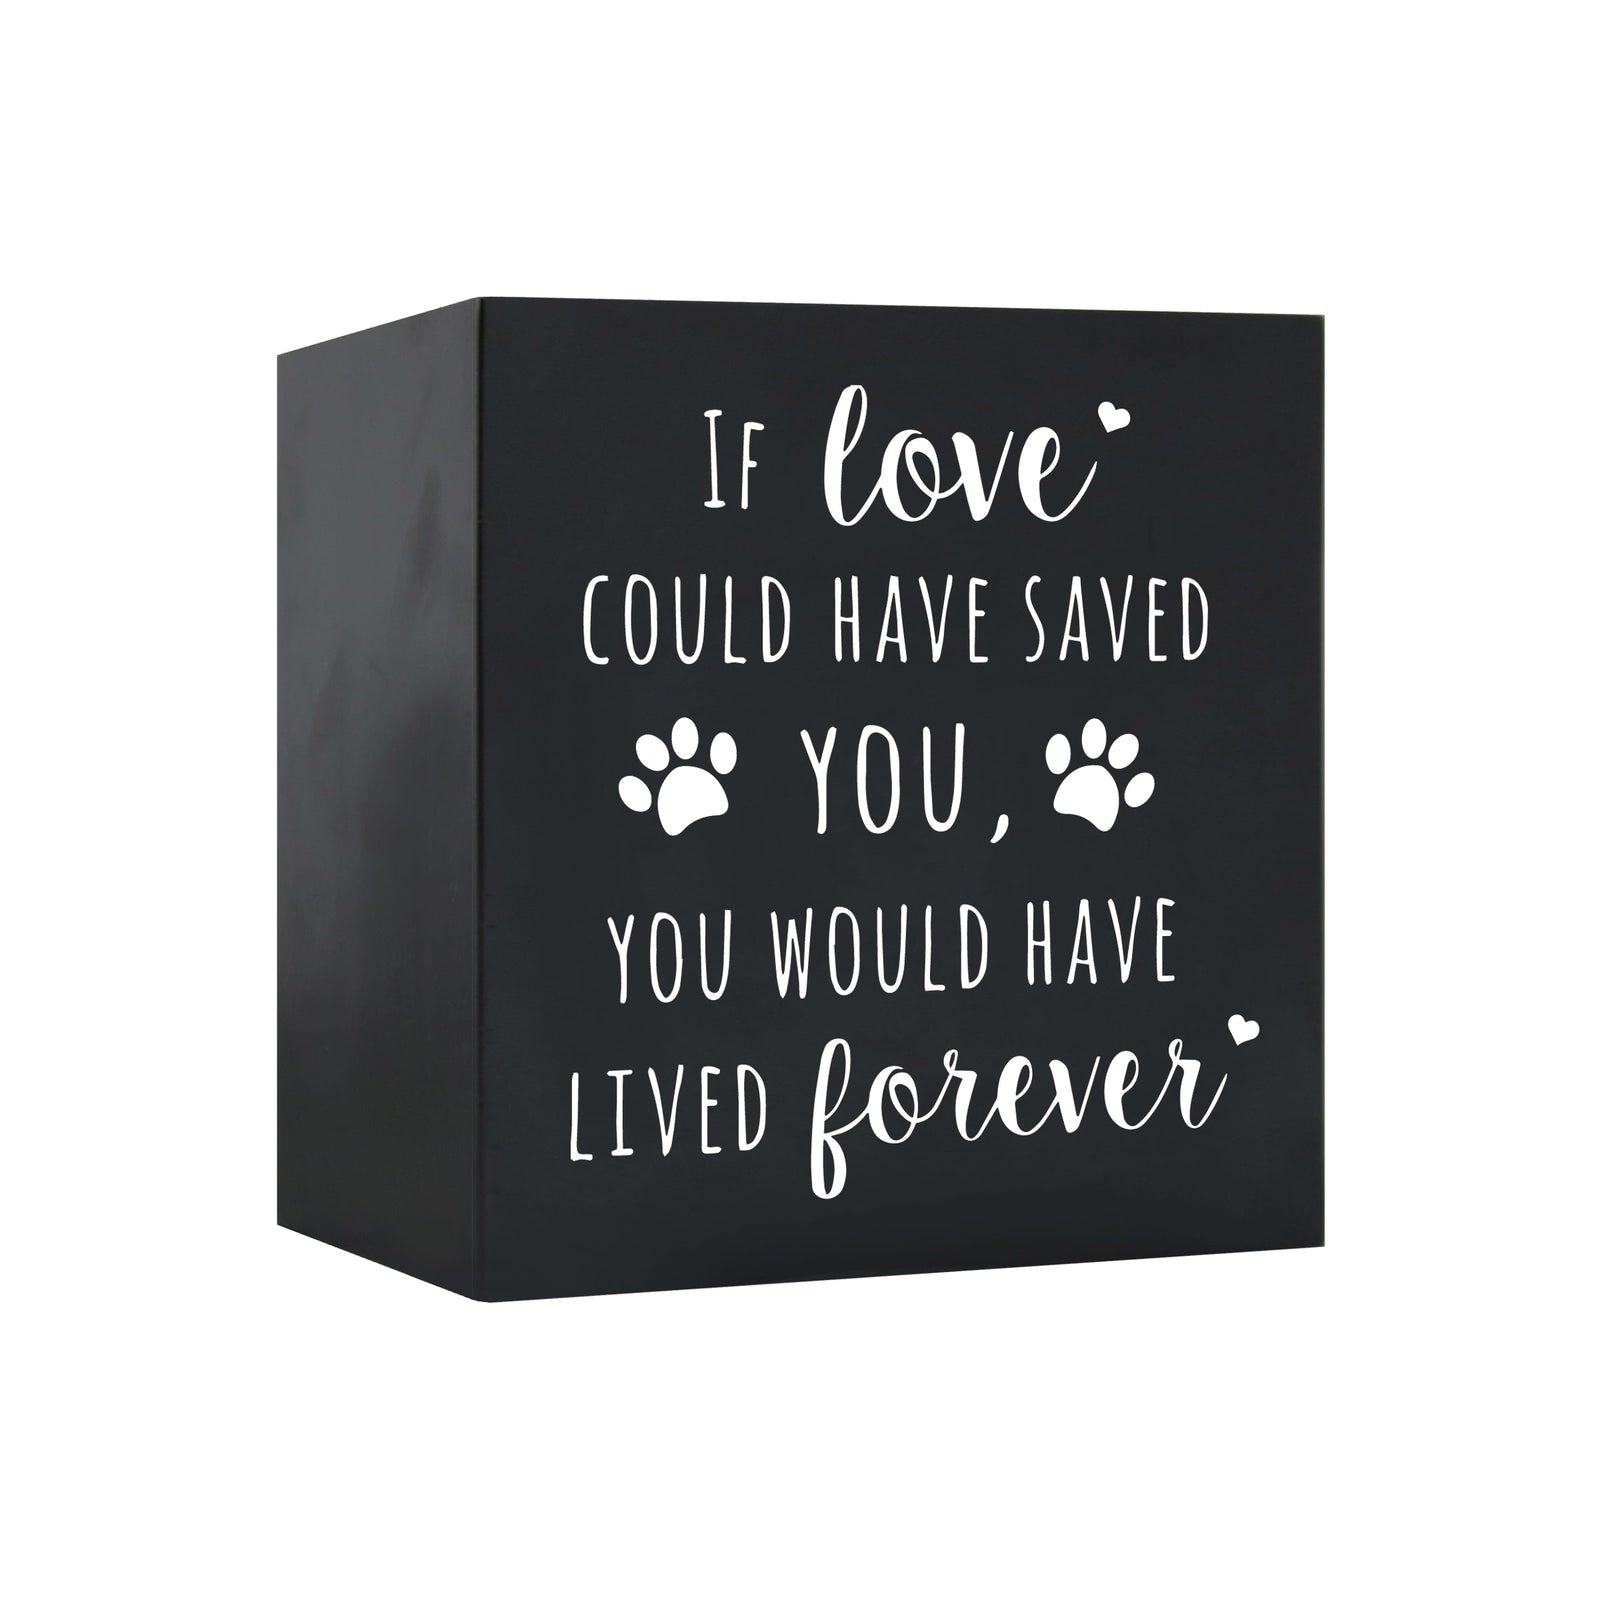 Pet Memorial Shadow Box Cremation Urn for Dog or Cat - If Love Could Have Saved You